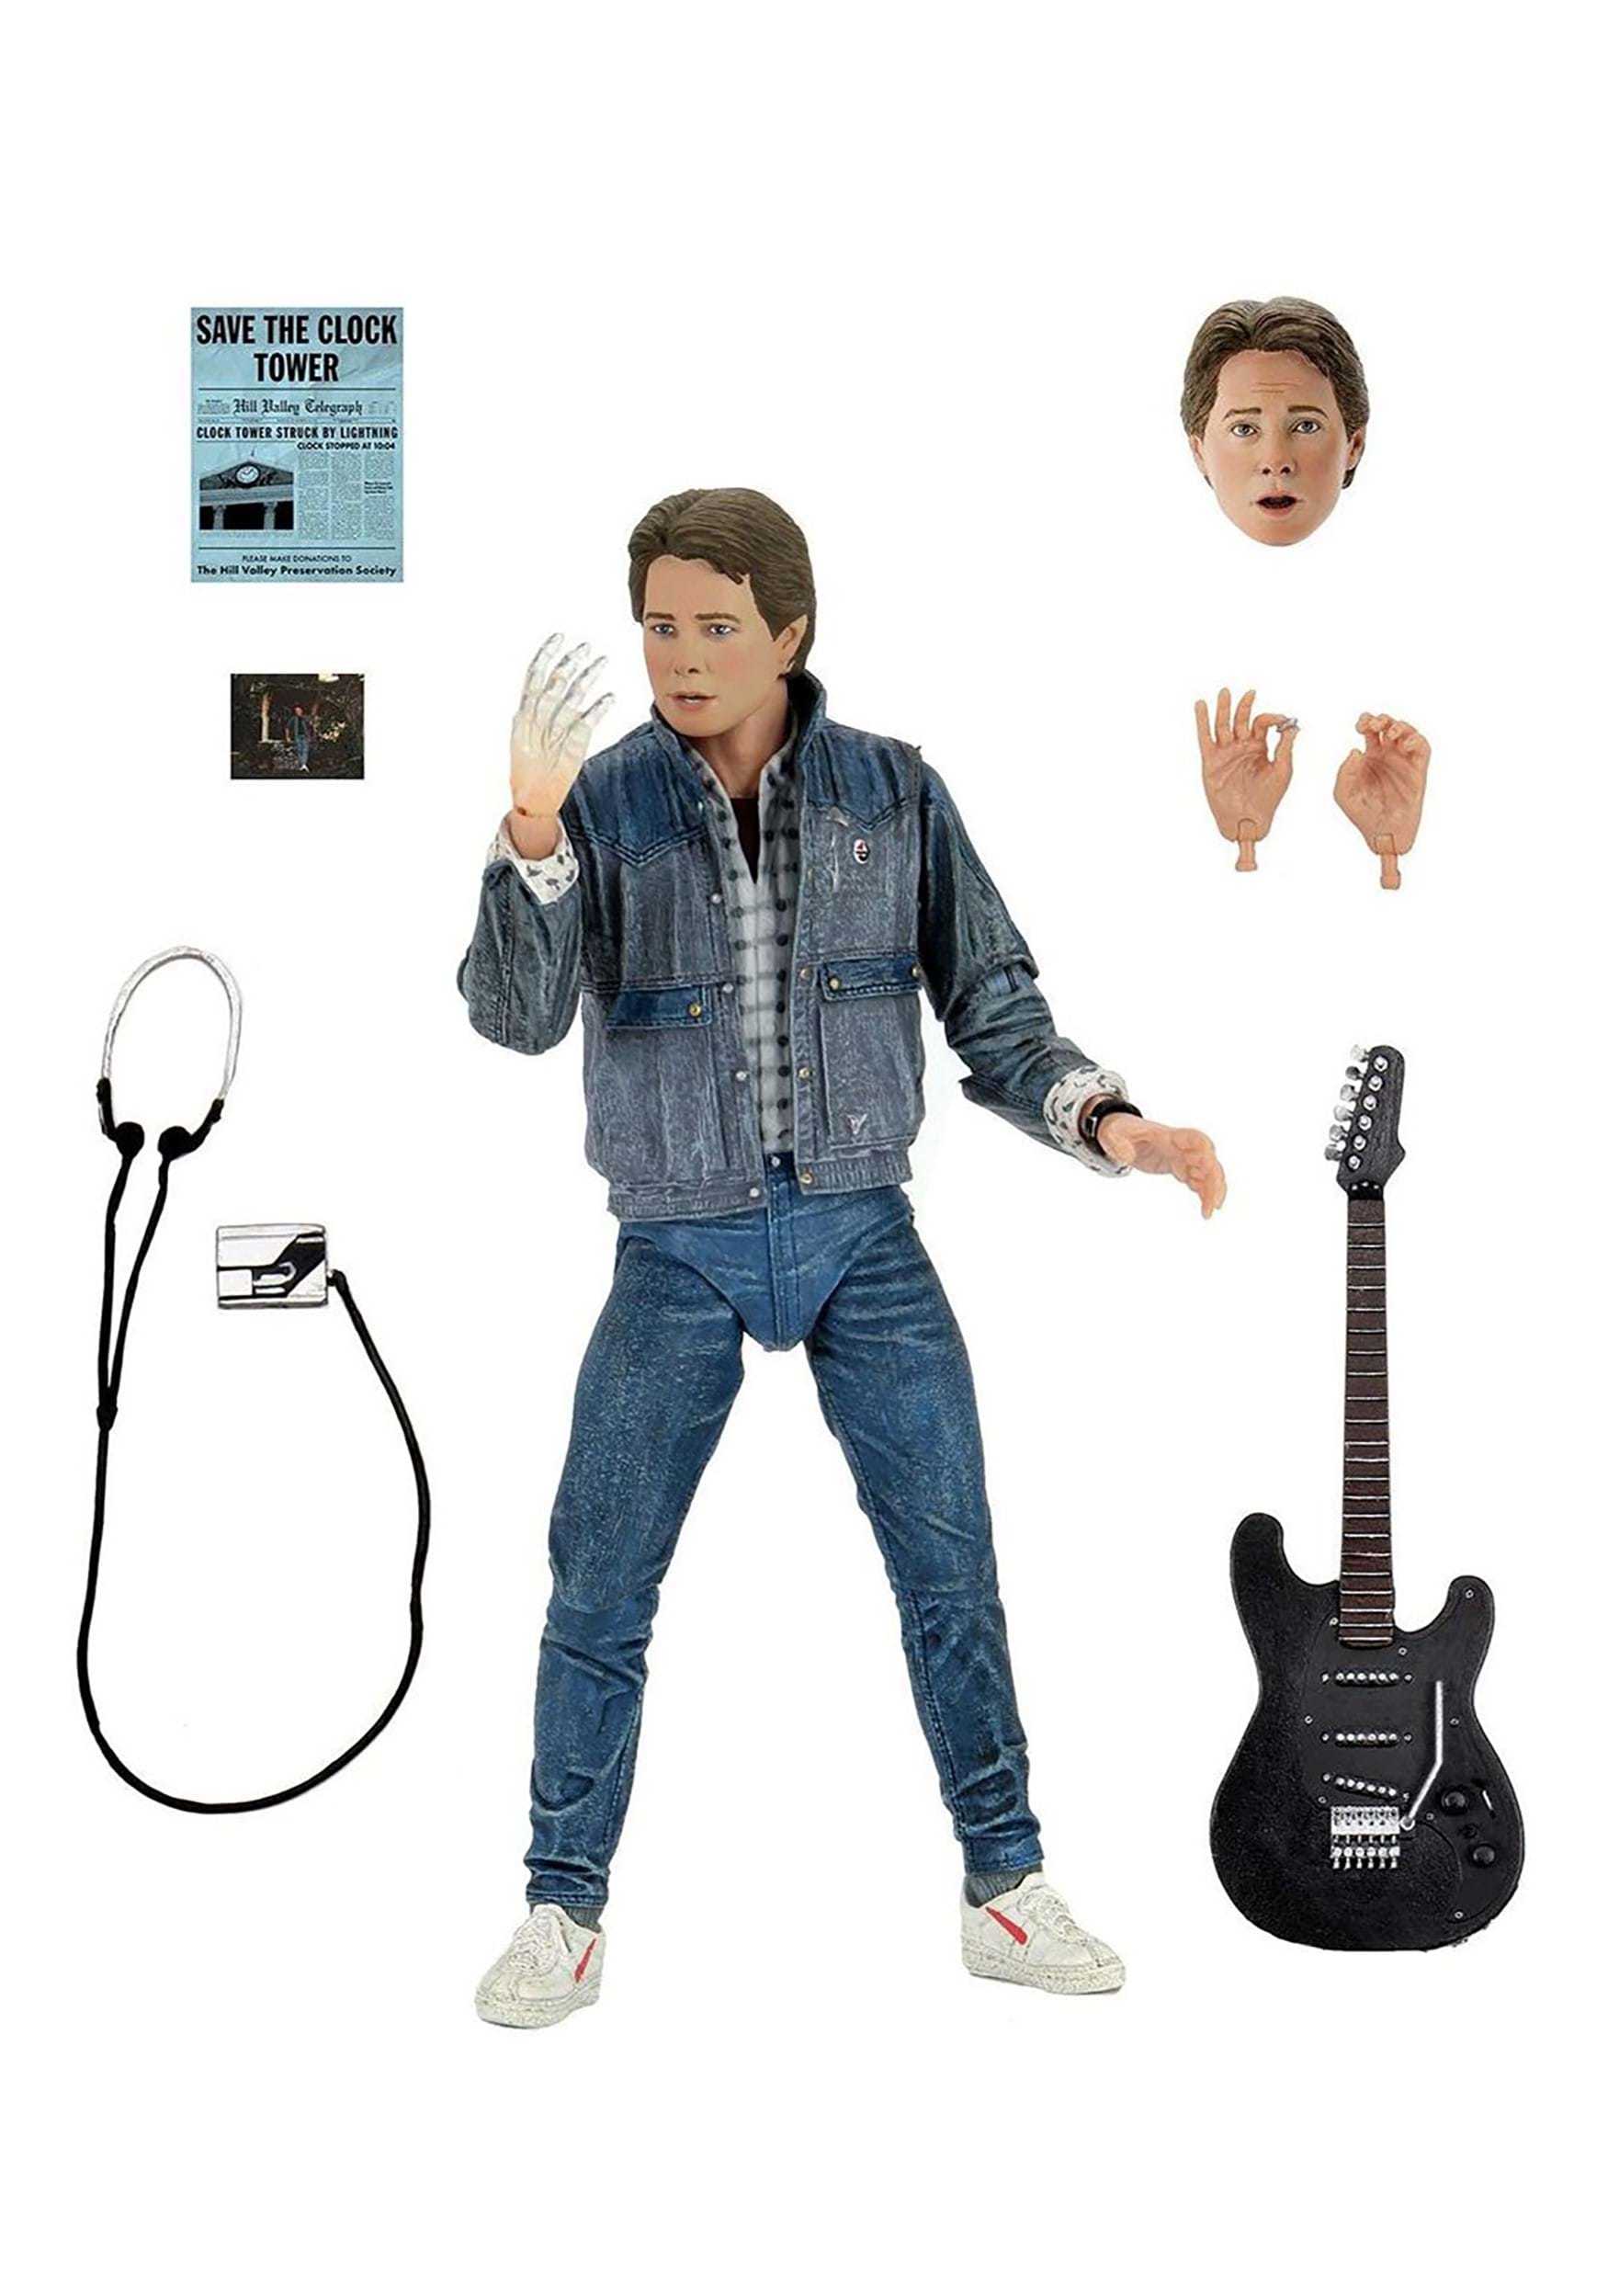 Back to the Future Marty McFly Audition 7" Scale Action Figure